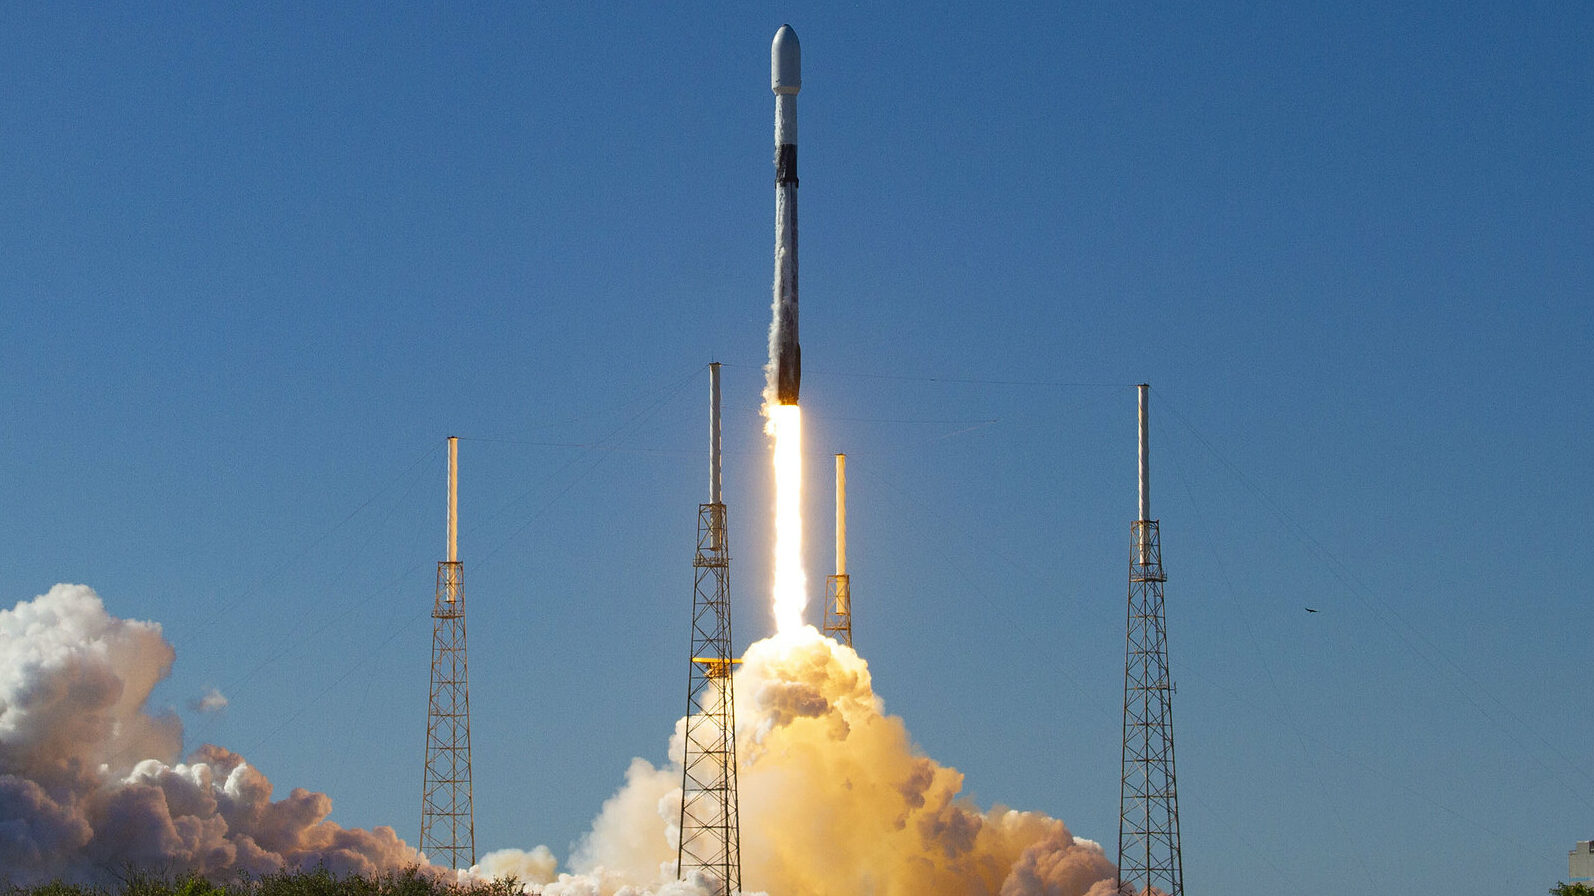 Launch of the Falcon 9 for the SpaceX Transporter-3 mission, © SpaceX